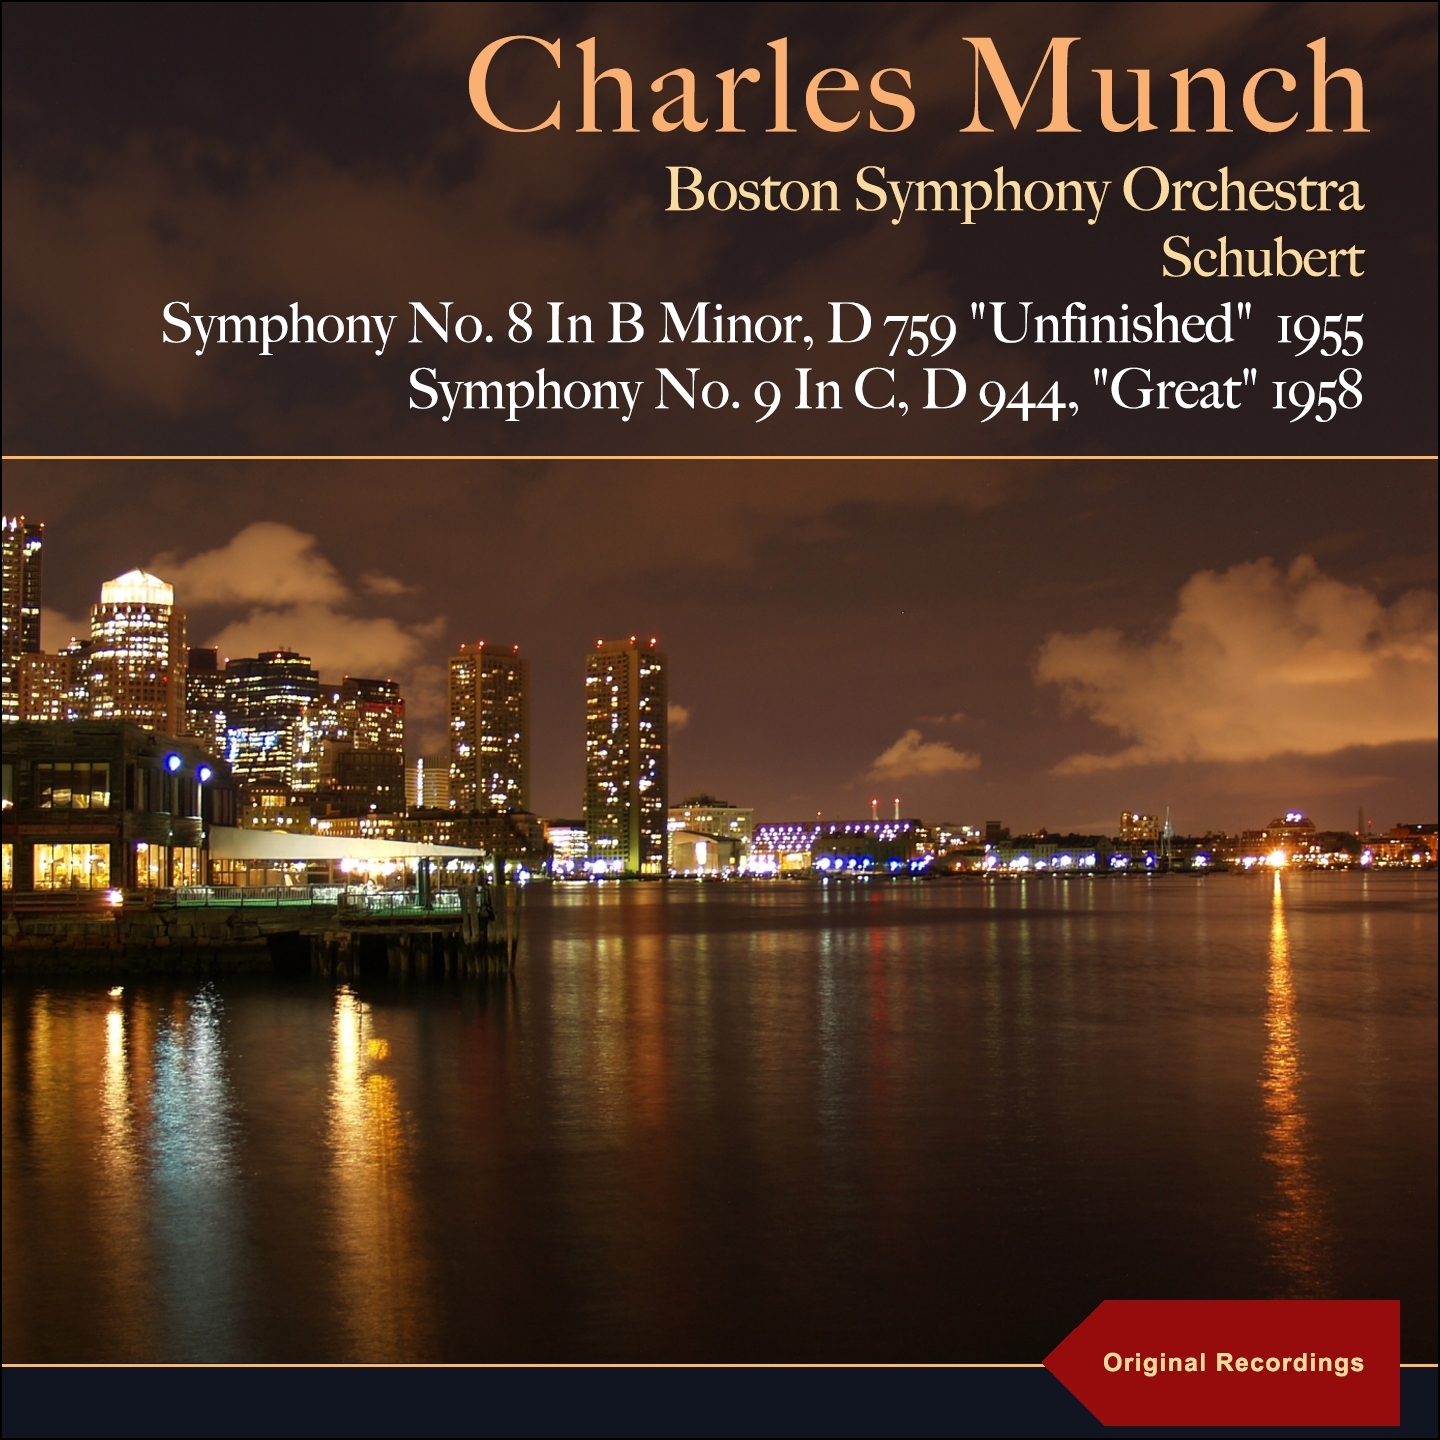 Symphony No. 8 in B Minor, D. 759 "Unfinished": I. Allegro moderato